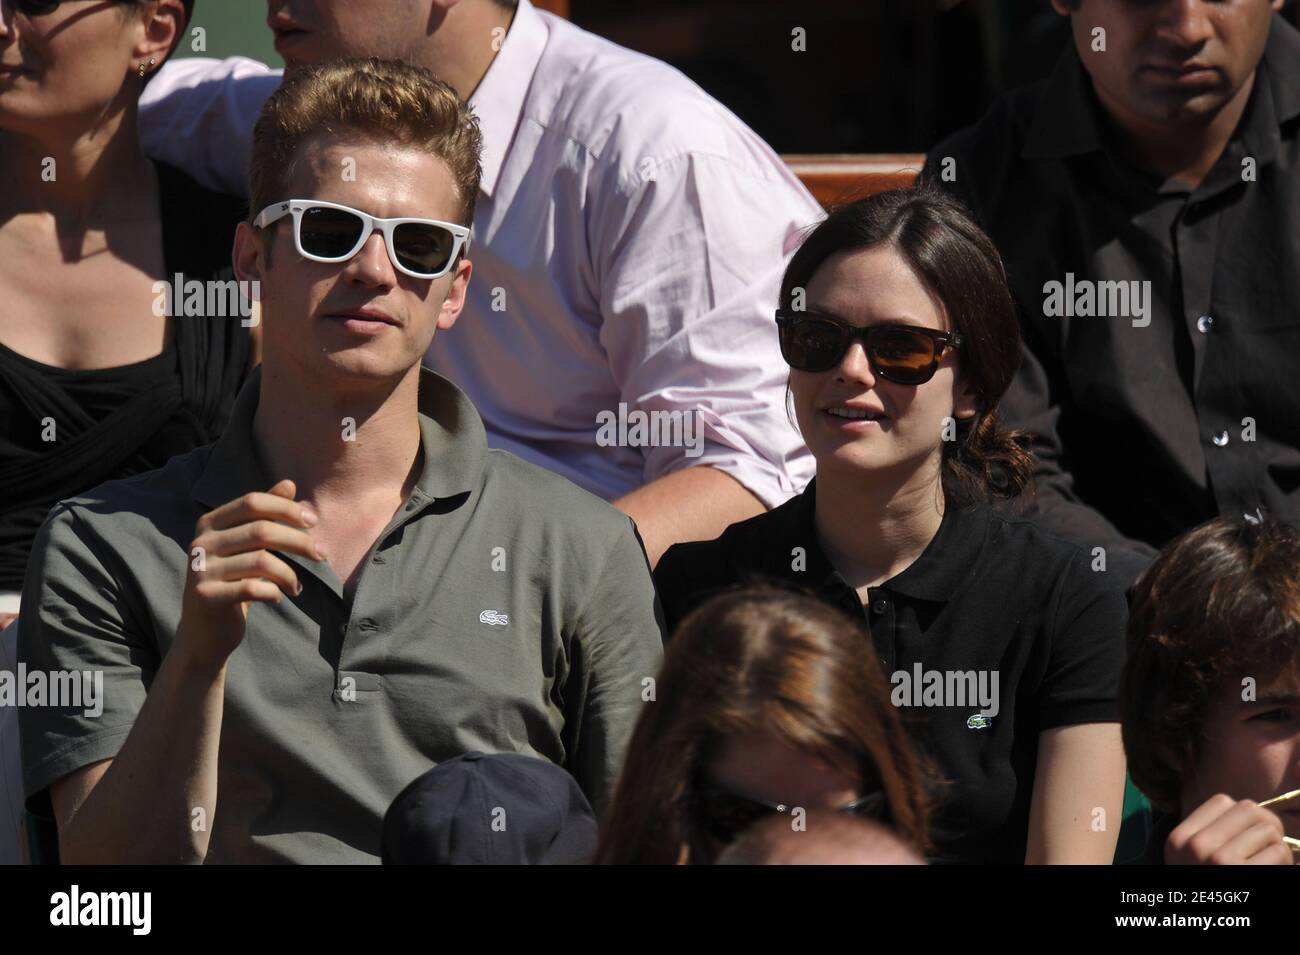 Hayden Christensen and girlfriend Rachel Bilson attending the French Open  Tennis of Roland Garros in Paris, France on May 29, 2009. Photo by  Gorassini-Guignebourg/ABACAPRESS.COM Stock Photo - Alamy